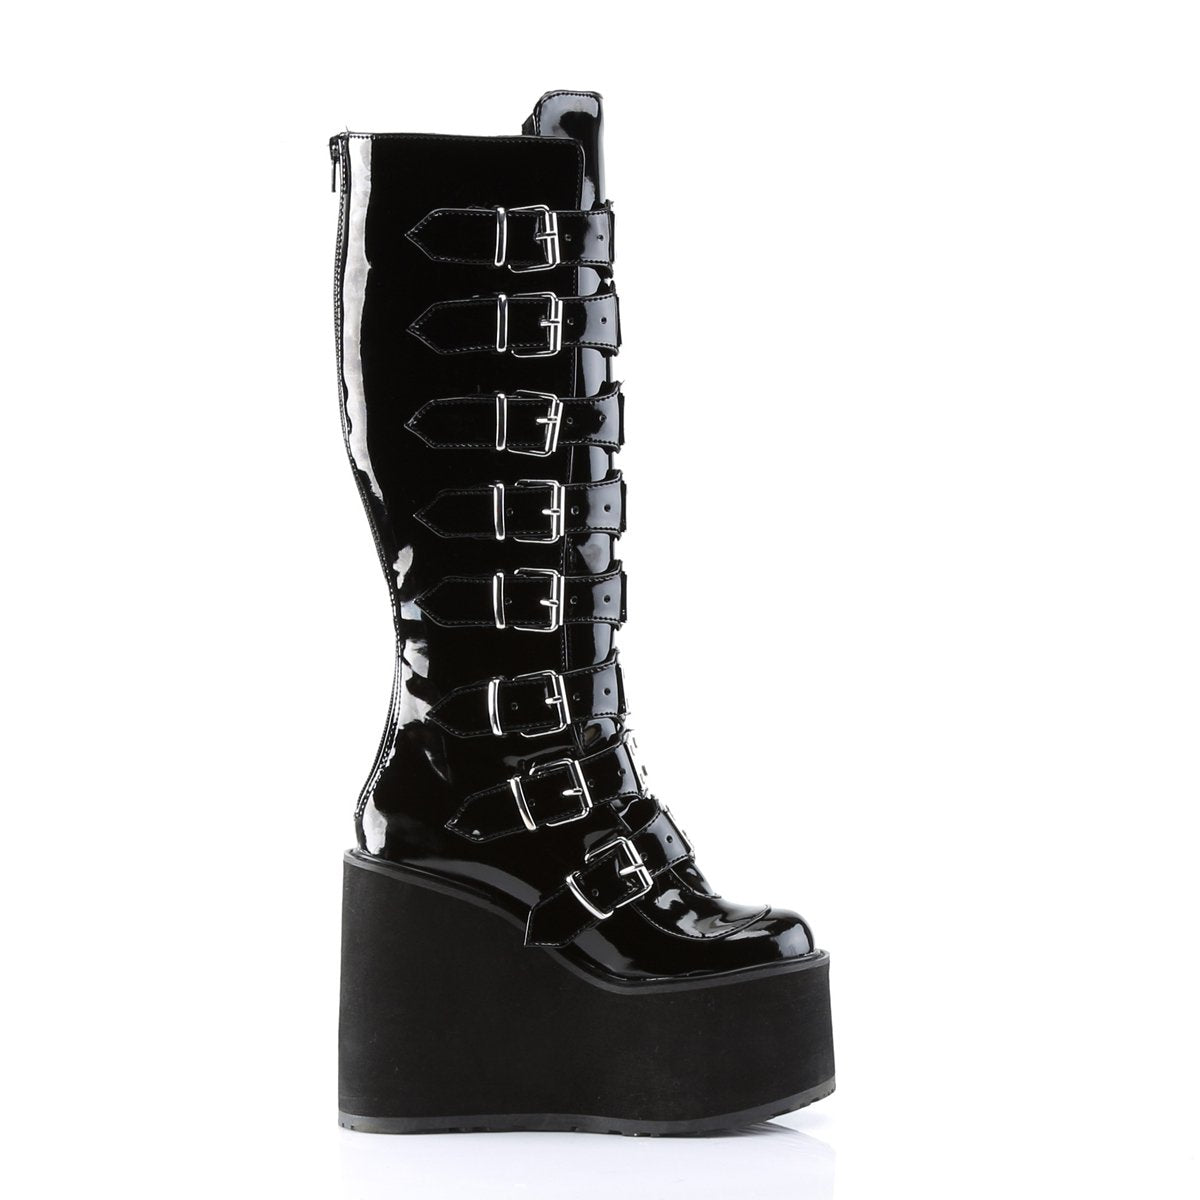 Gothic Swing Boots